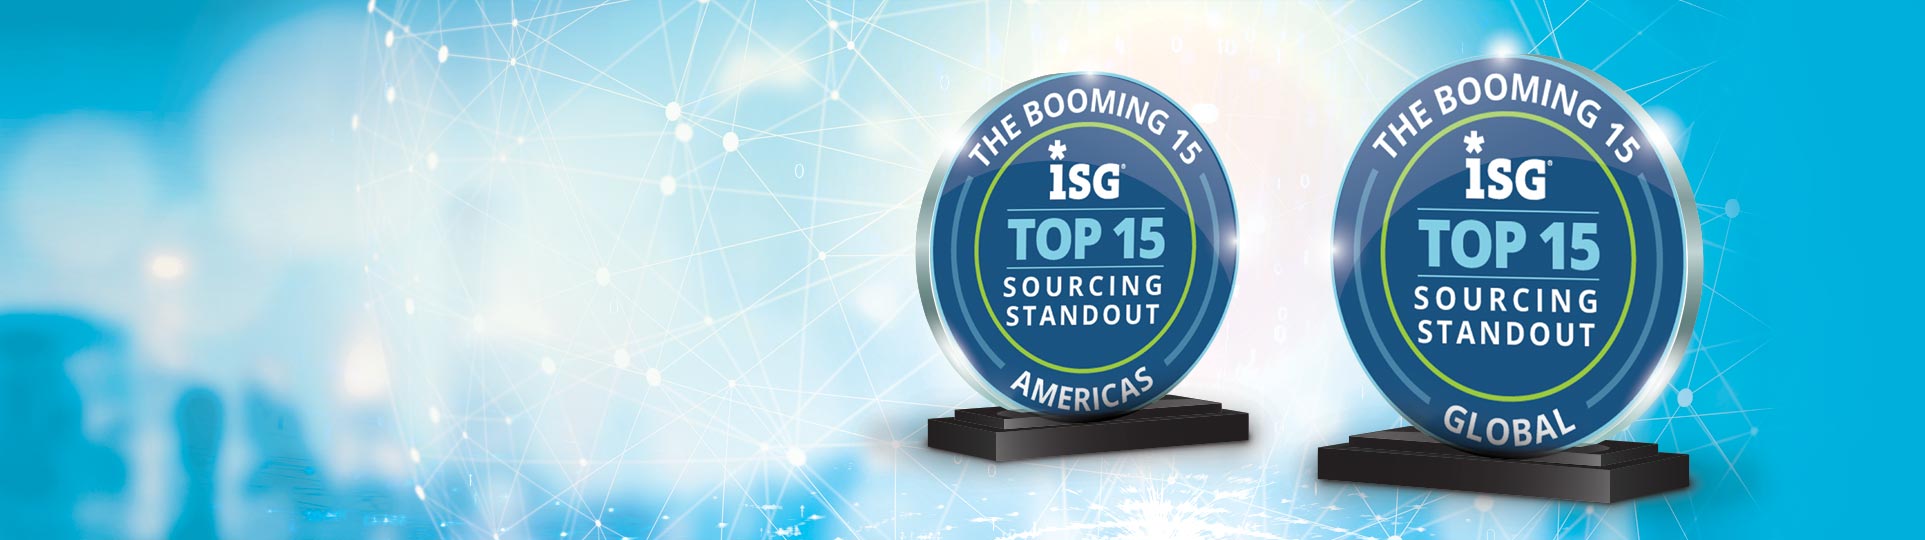 Birlasoft Named a Top 15 Technology Services Provider by ISG